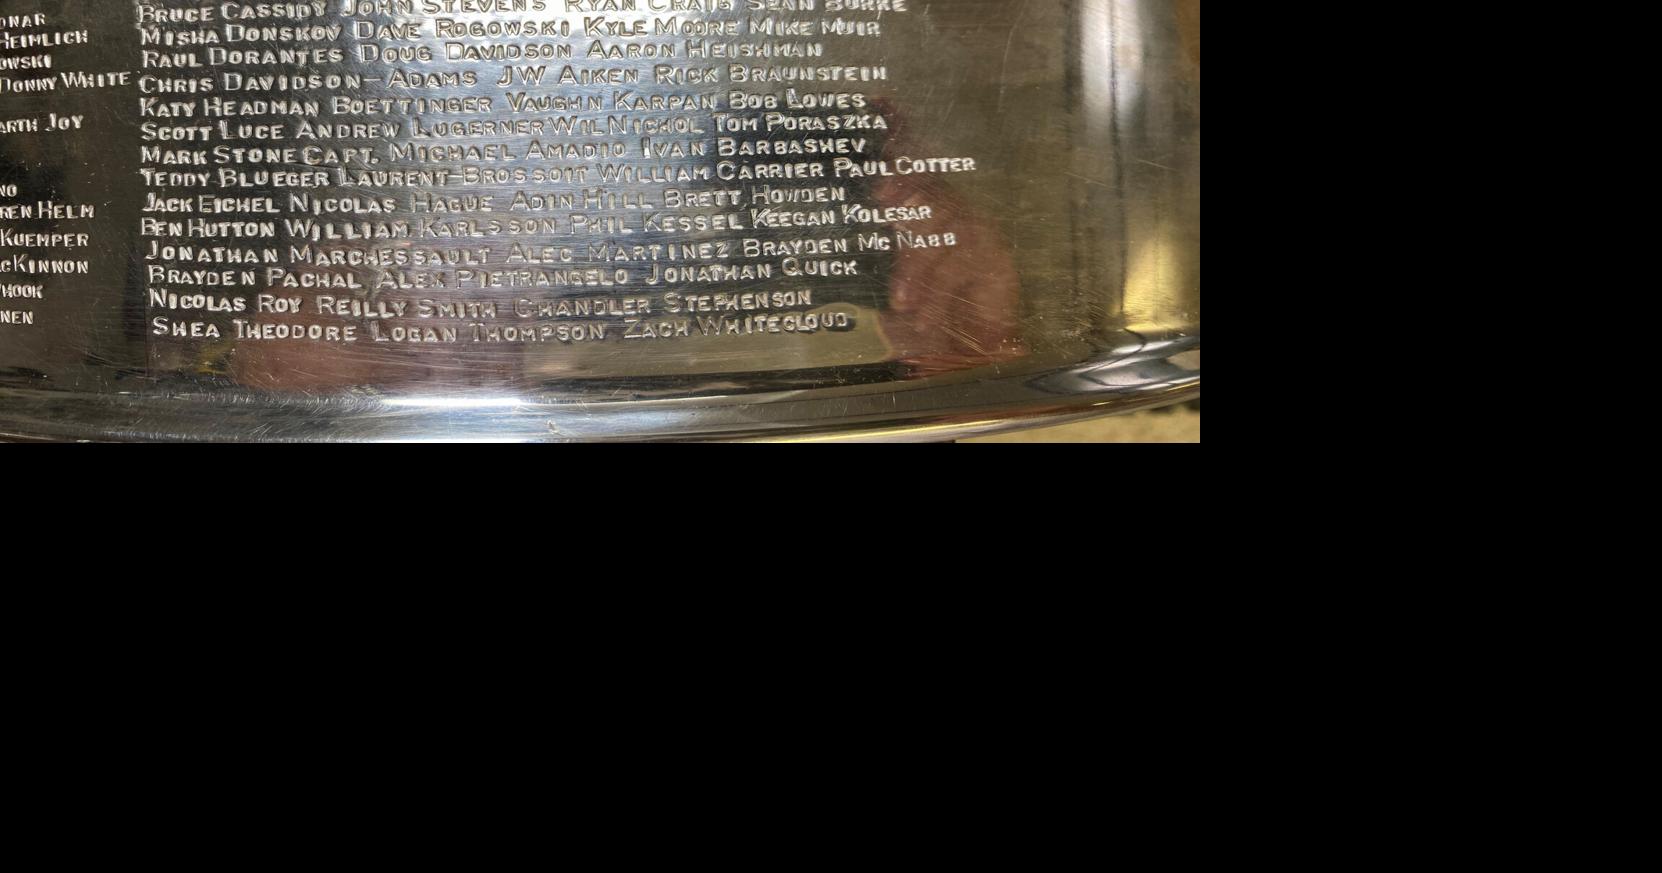 A first look at the Washington Capitals' engraving on the Stanley Cup